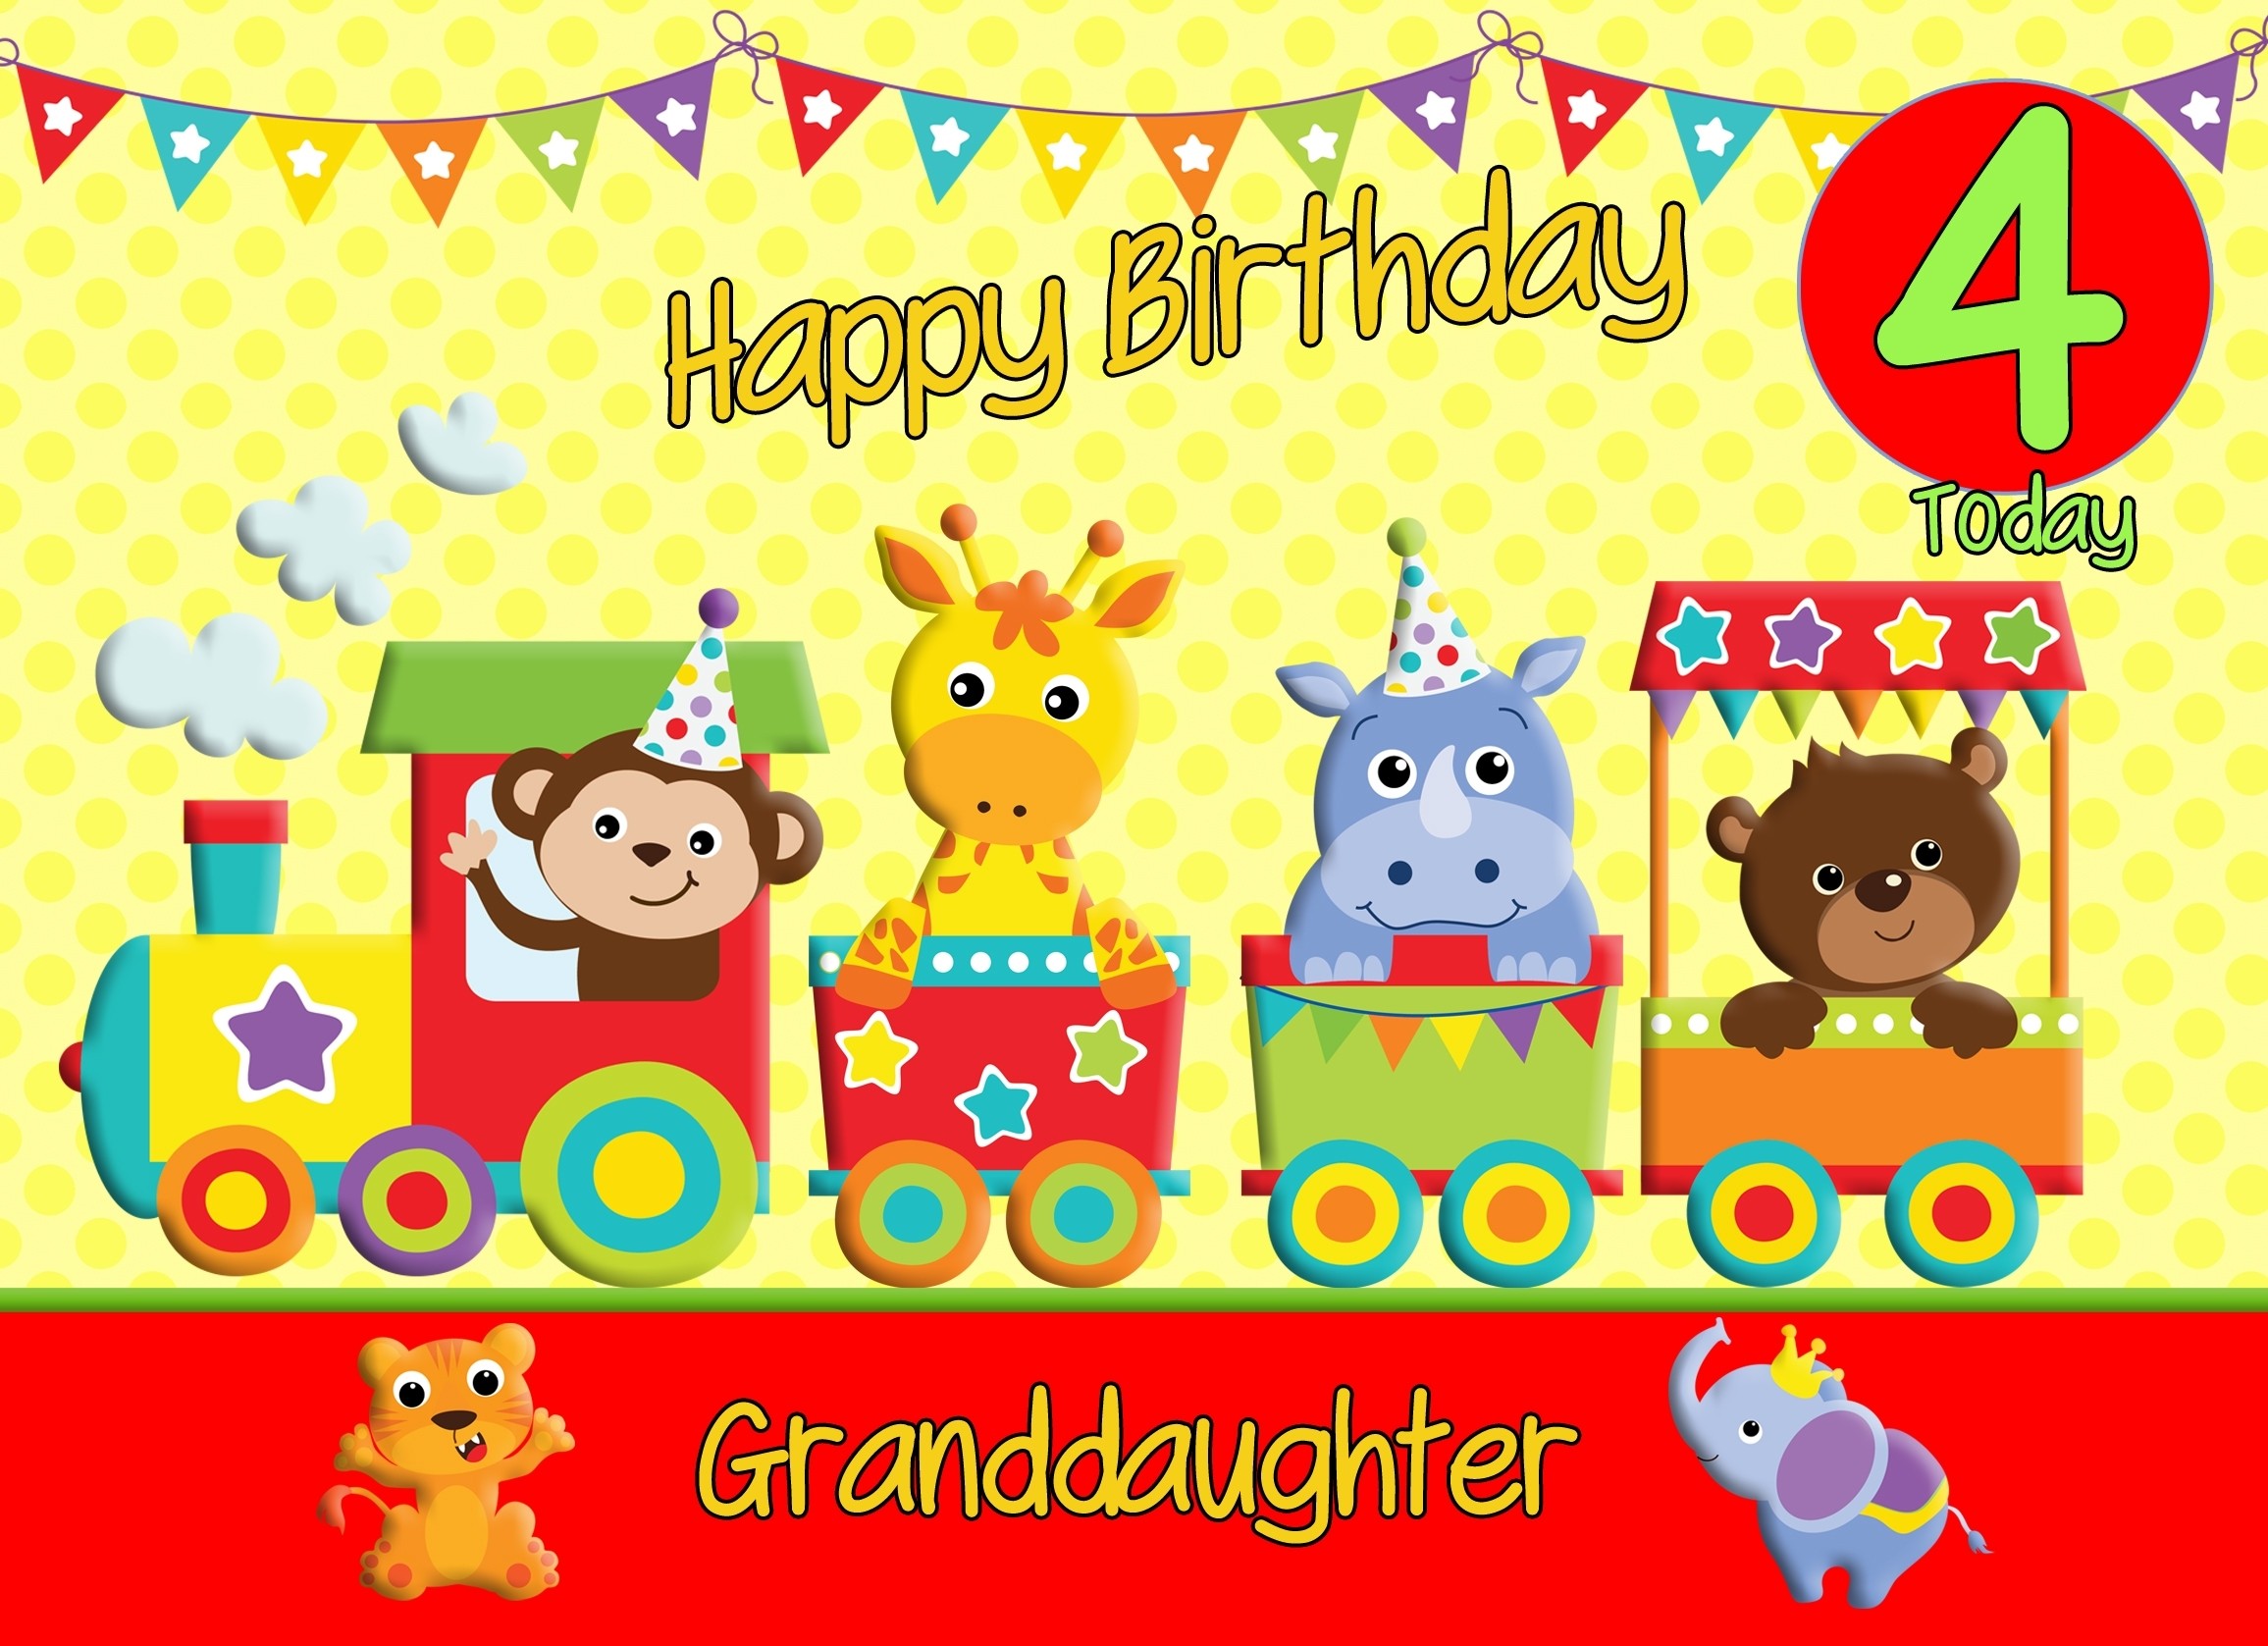 4th Birthday Card for Granddaughter (Train Yellow)